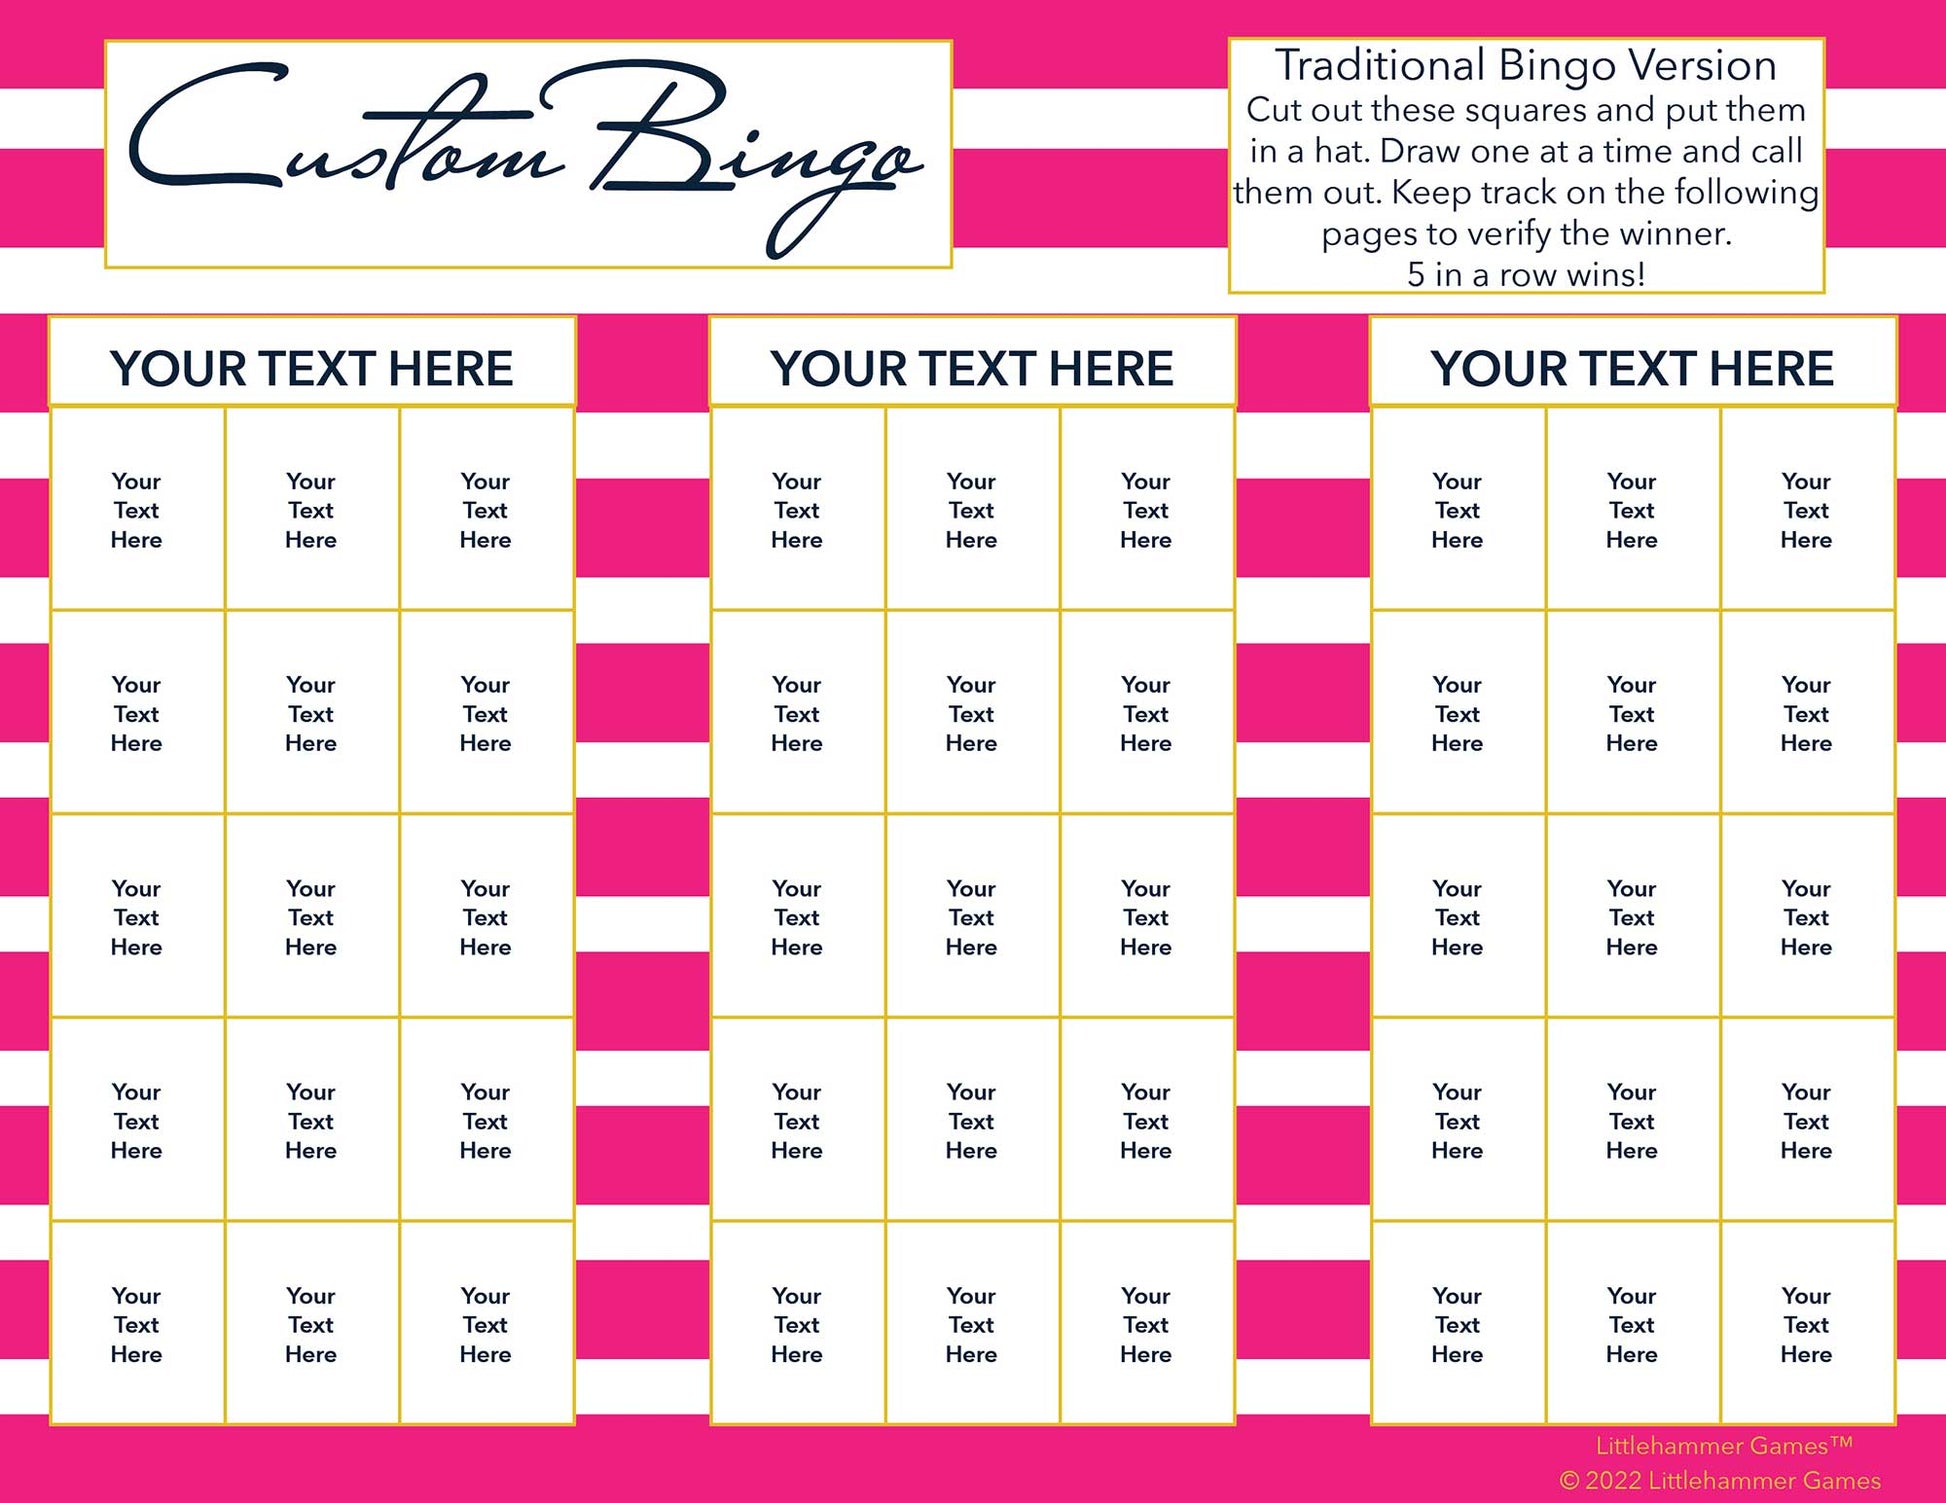 Custom Bingo calling card with a pink-striped background